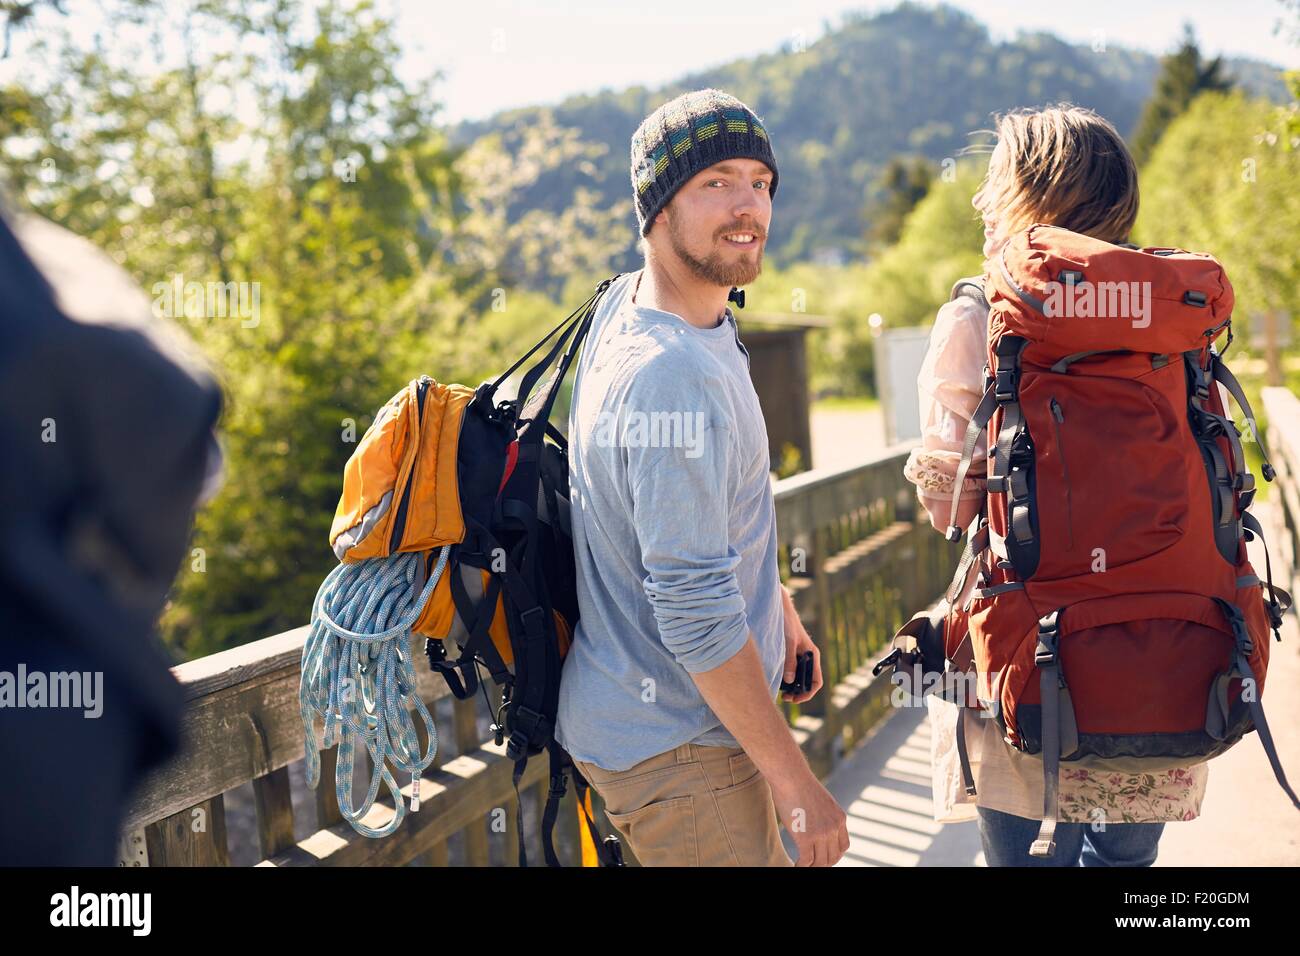 Rear view of hikers carrying backpacks, looking over shoulder, smiling Stock Photo